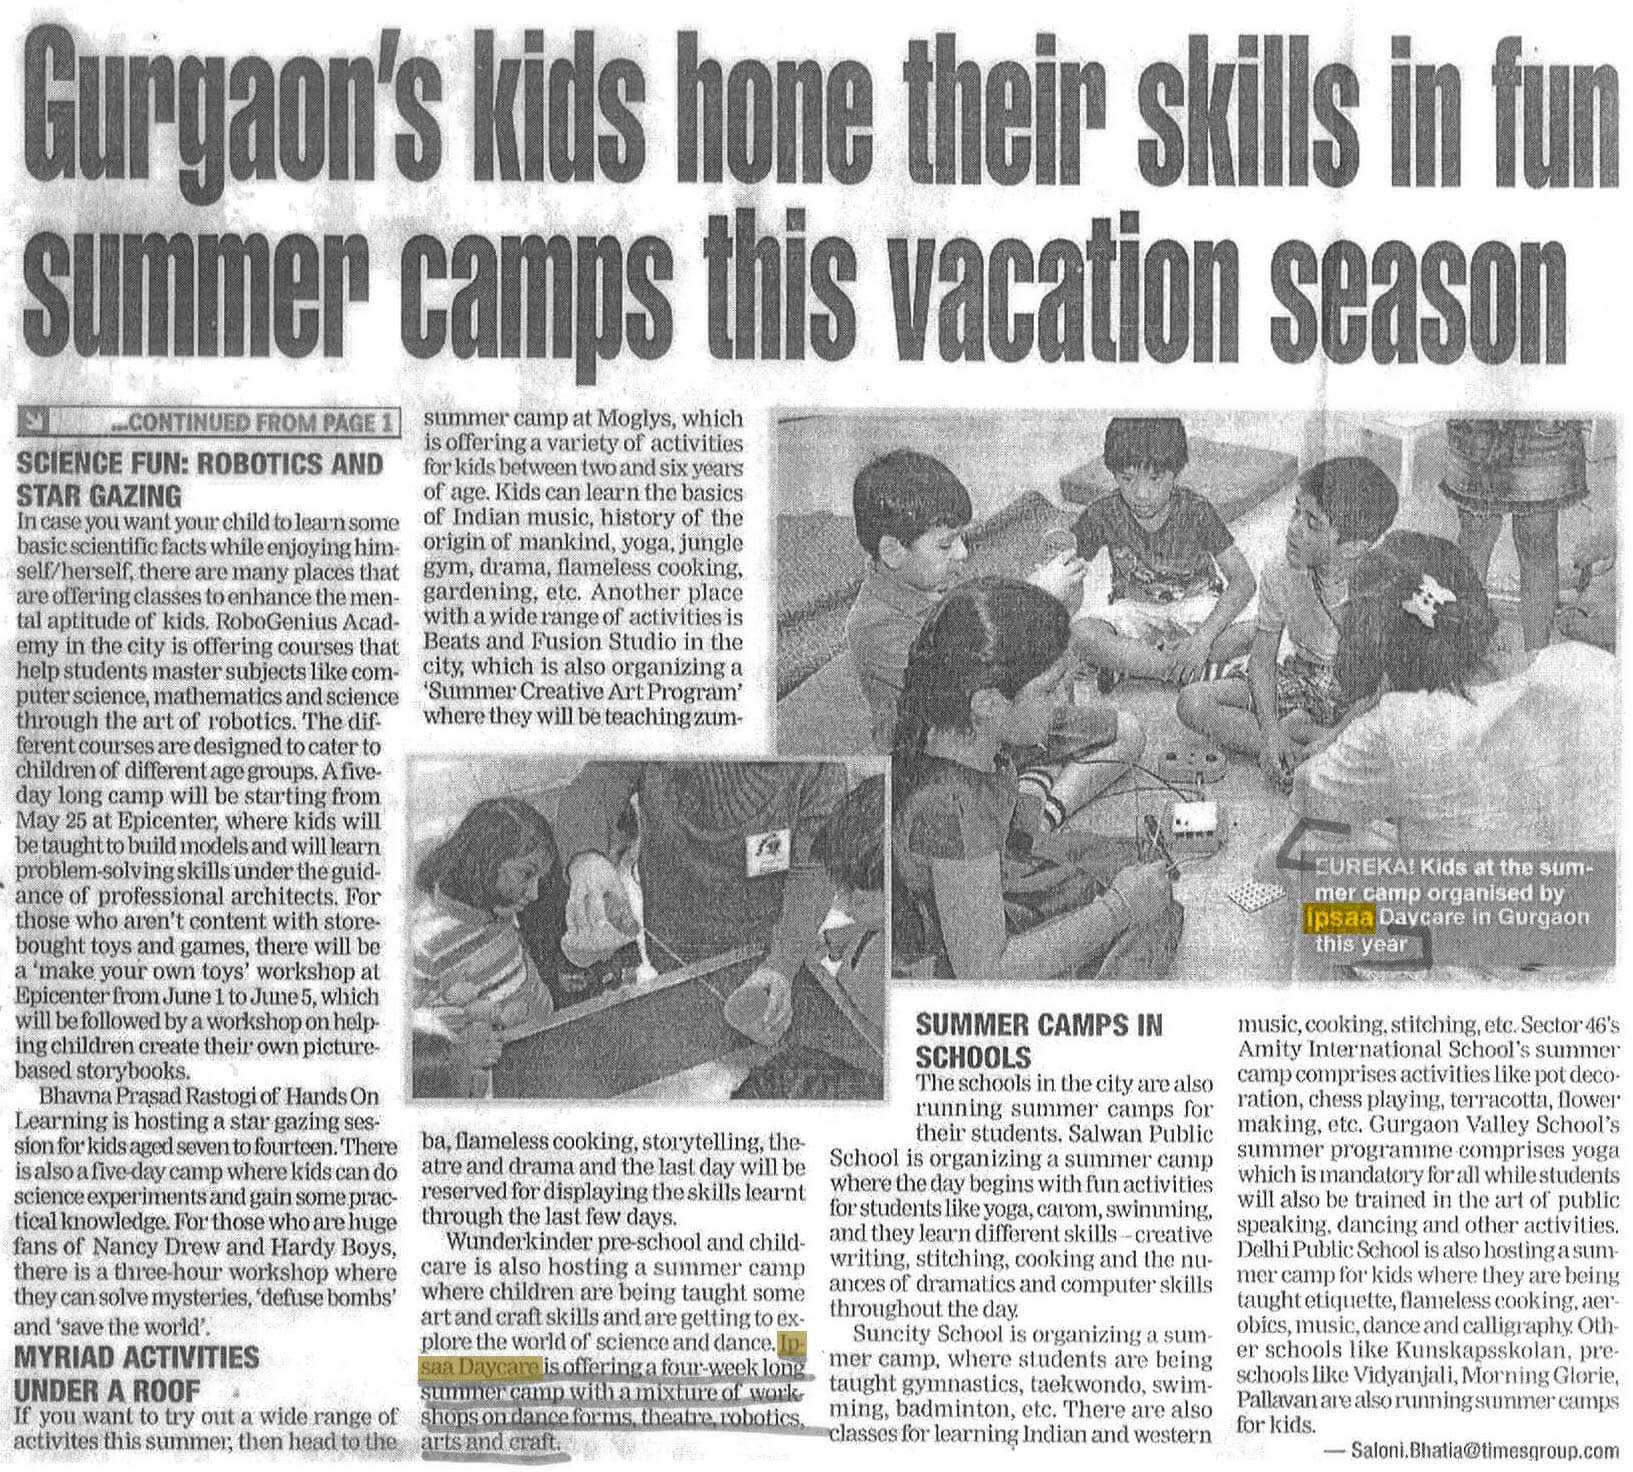 gurgaon’s kids done their skills in fun summer camps this vacation season